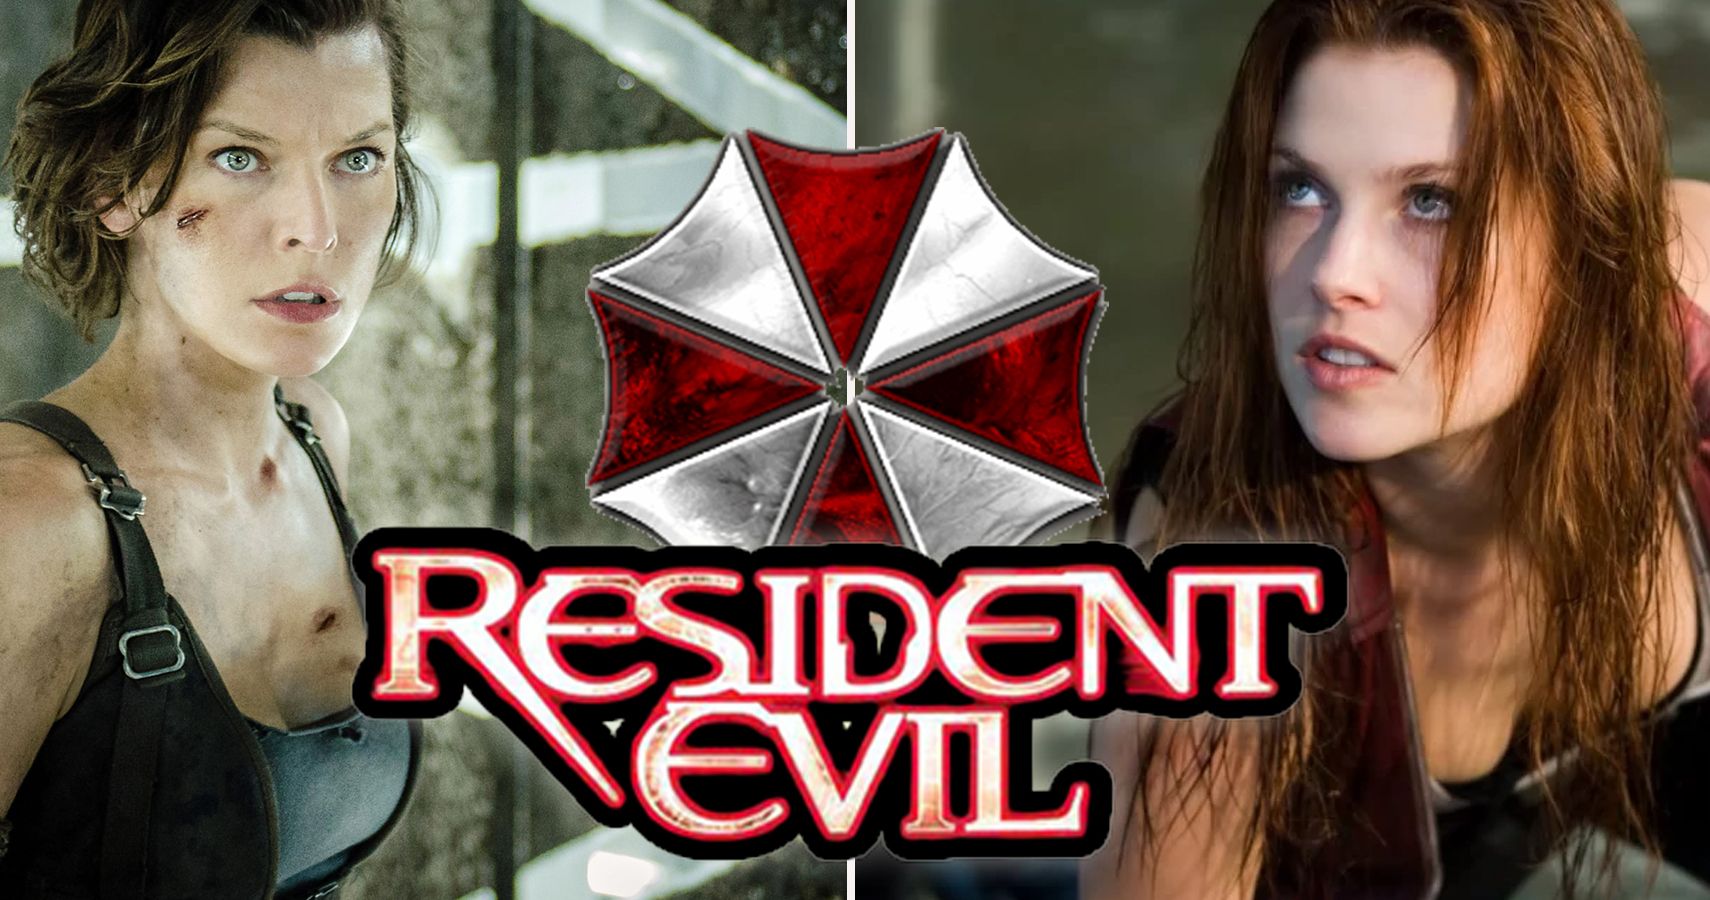 Bring Sienna Guillory back as Jill Valentine in Resident Evil 6 